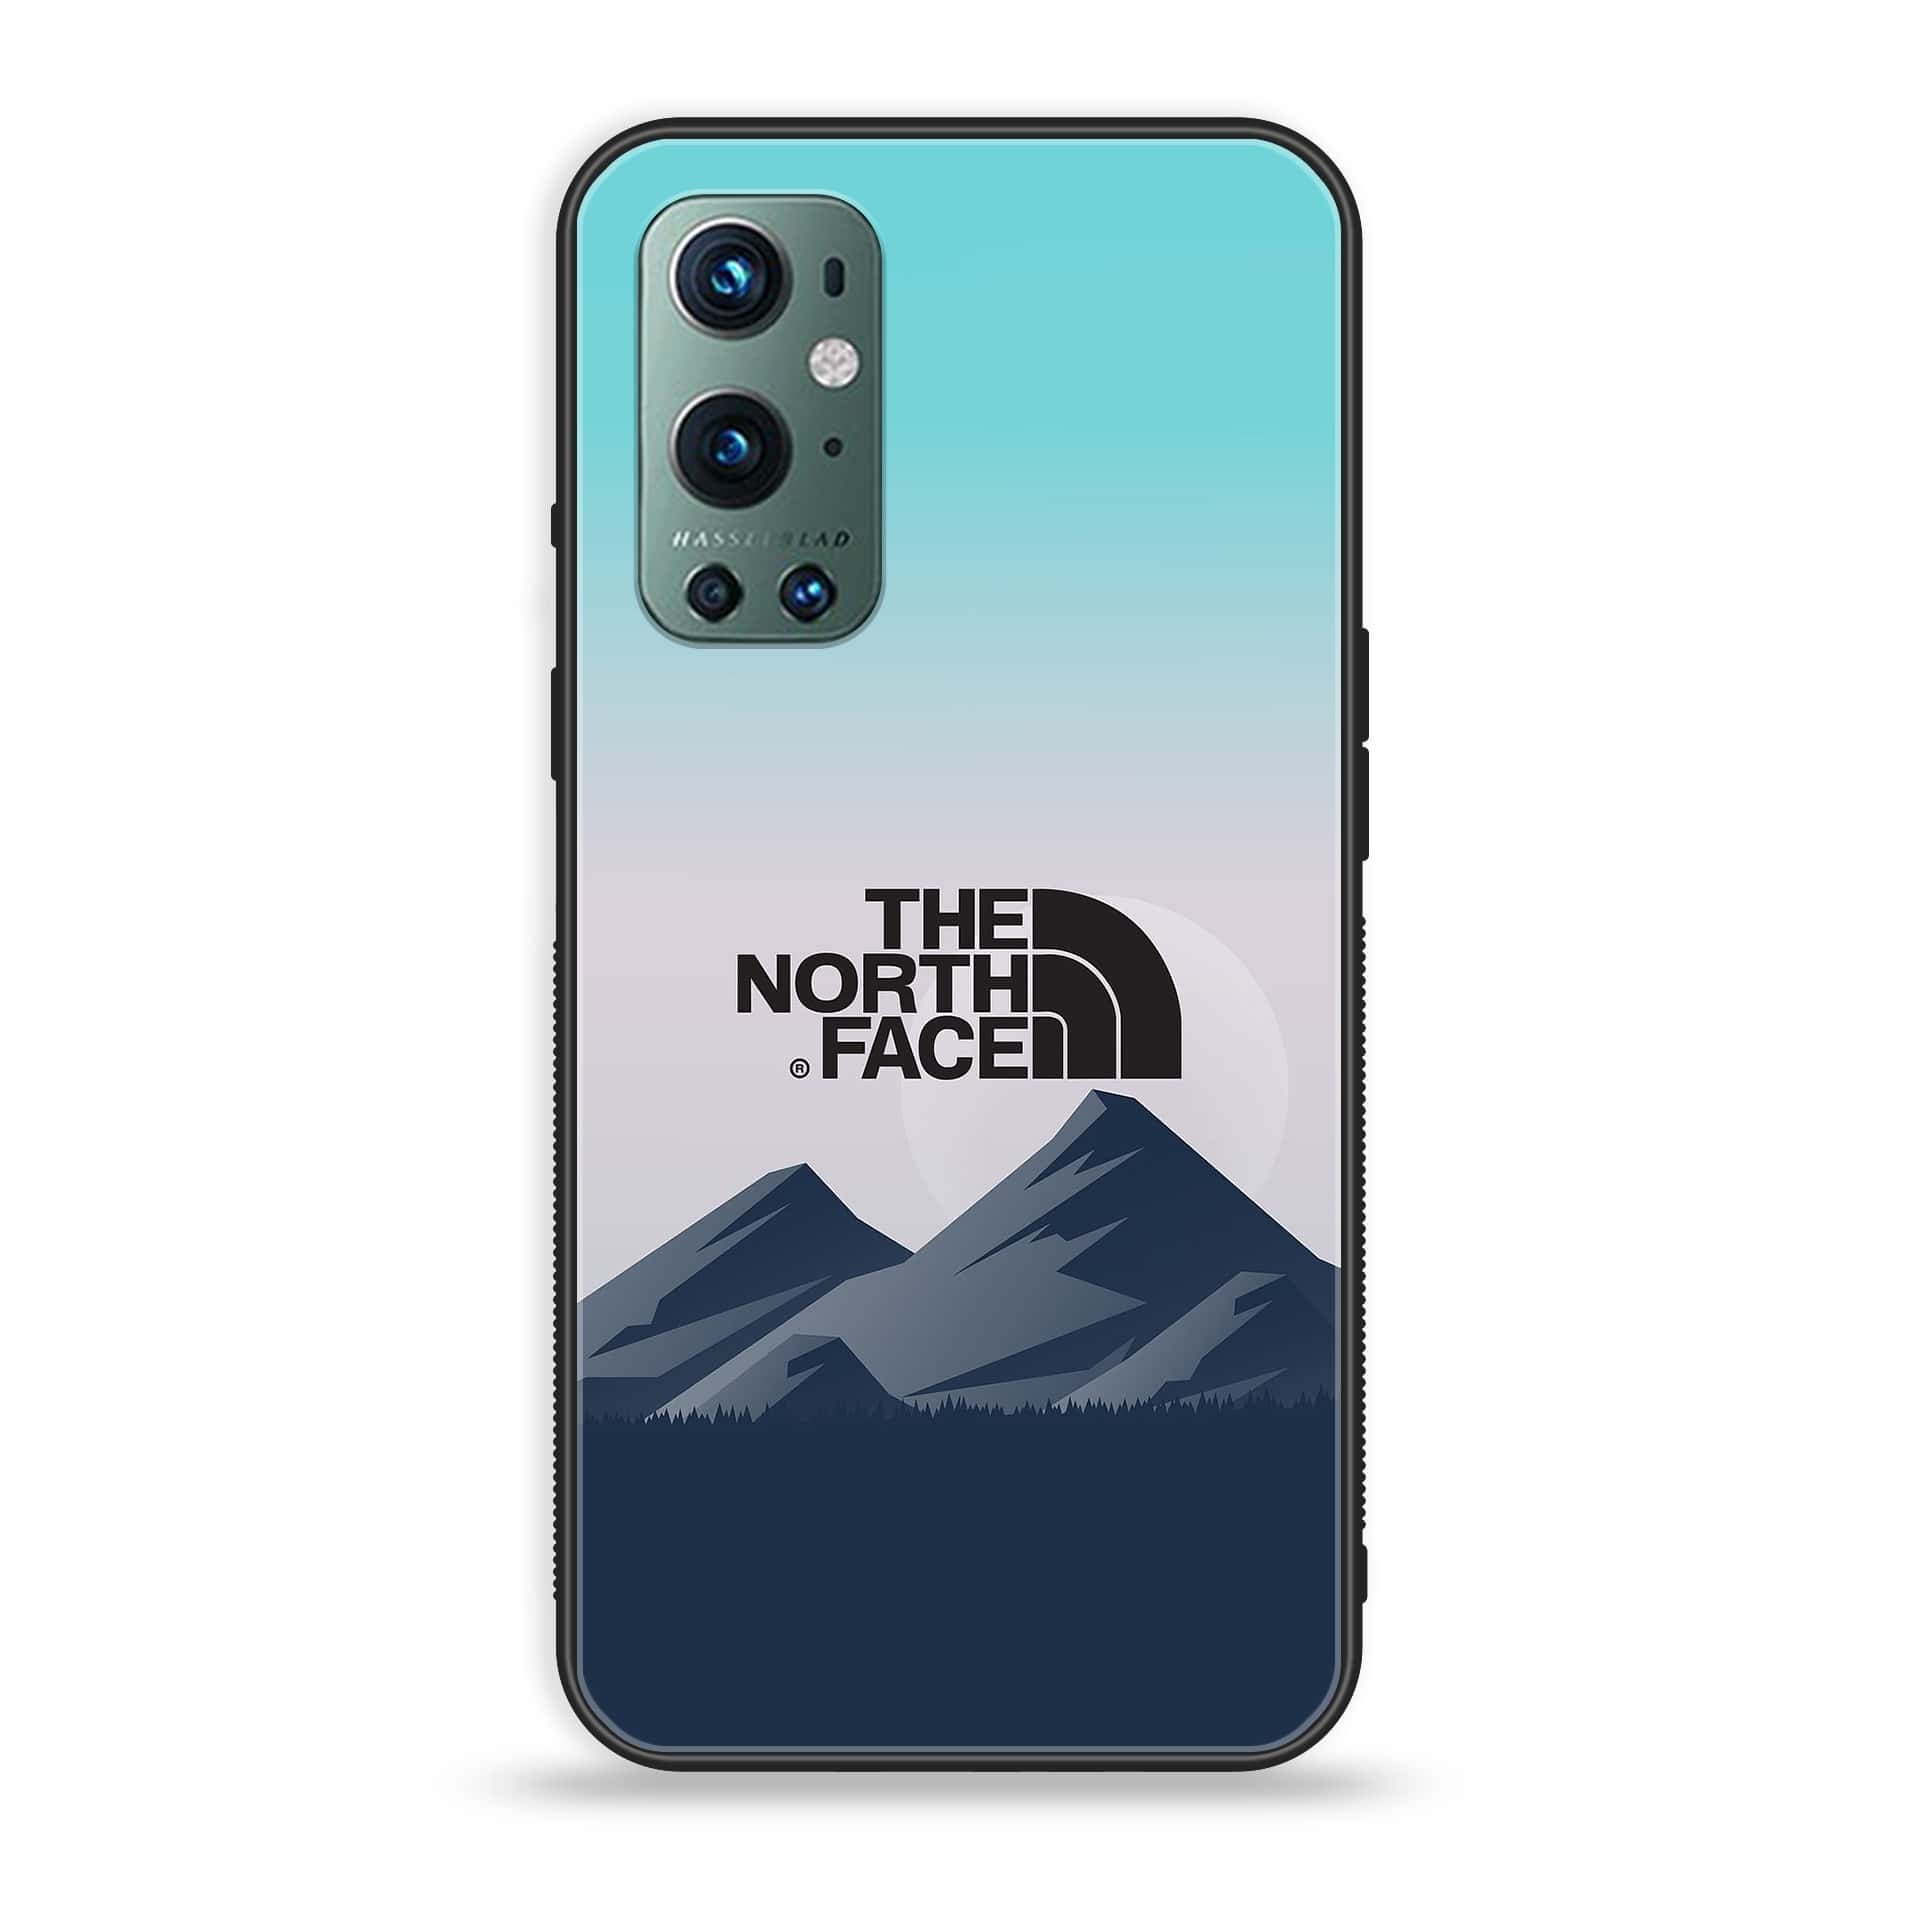 OnePlus 9 Pro - The North Face Series - Premium Printed Glass soft Bumper shock Proof Case